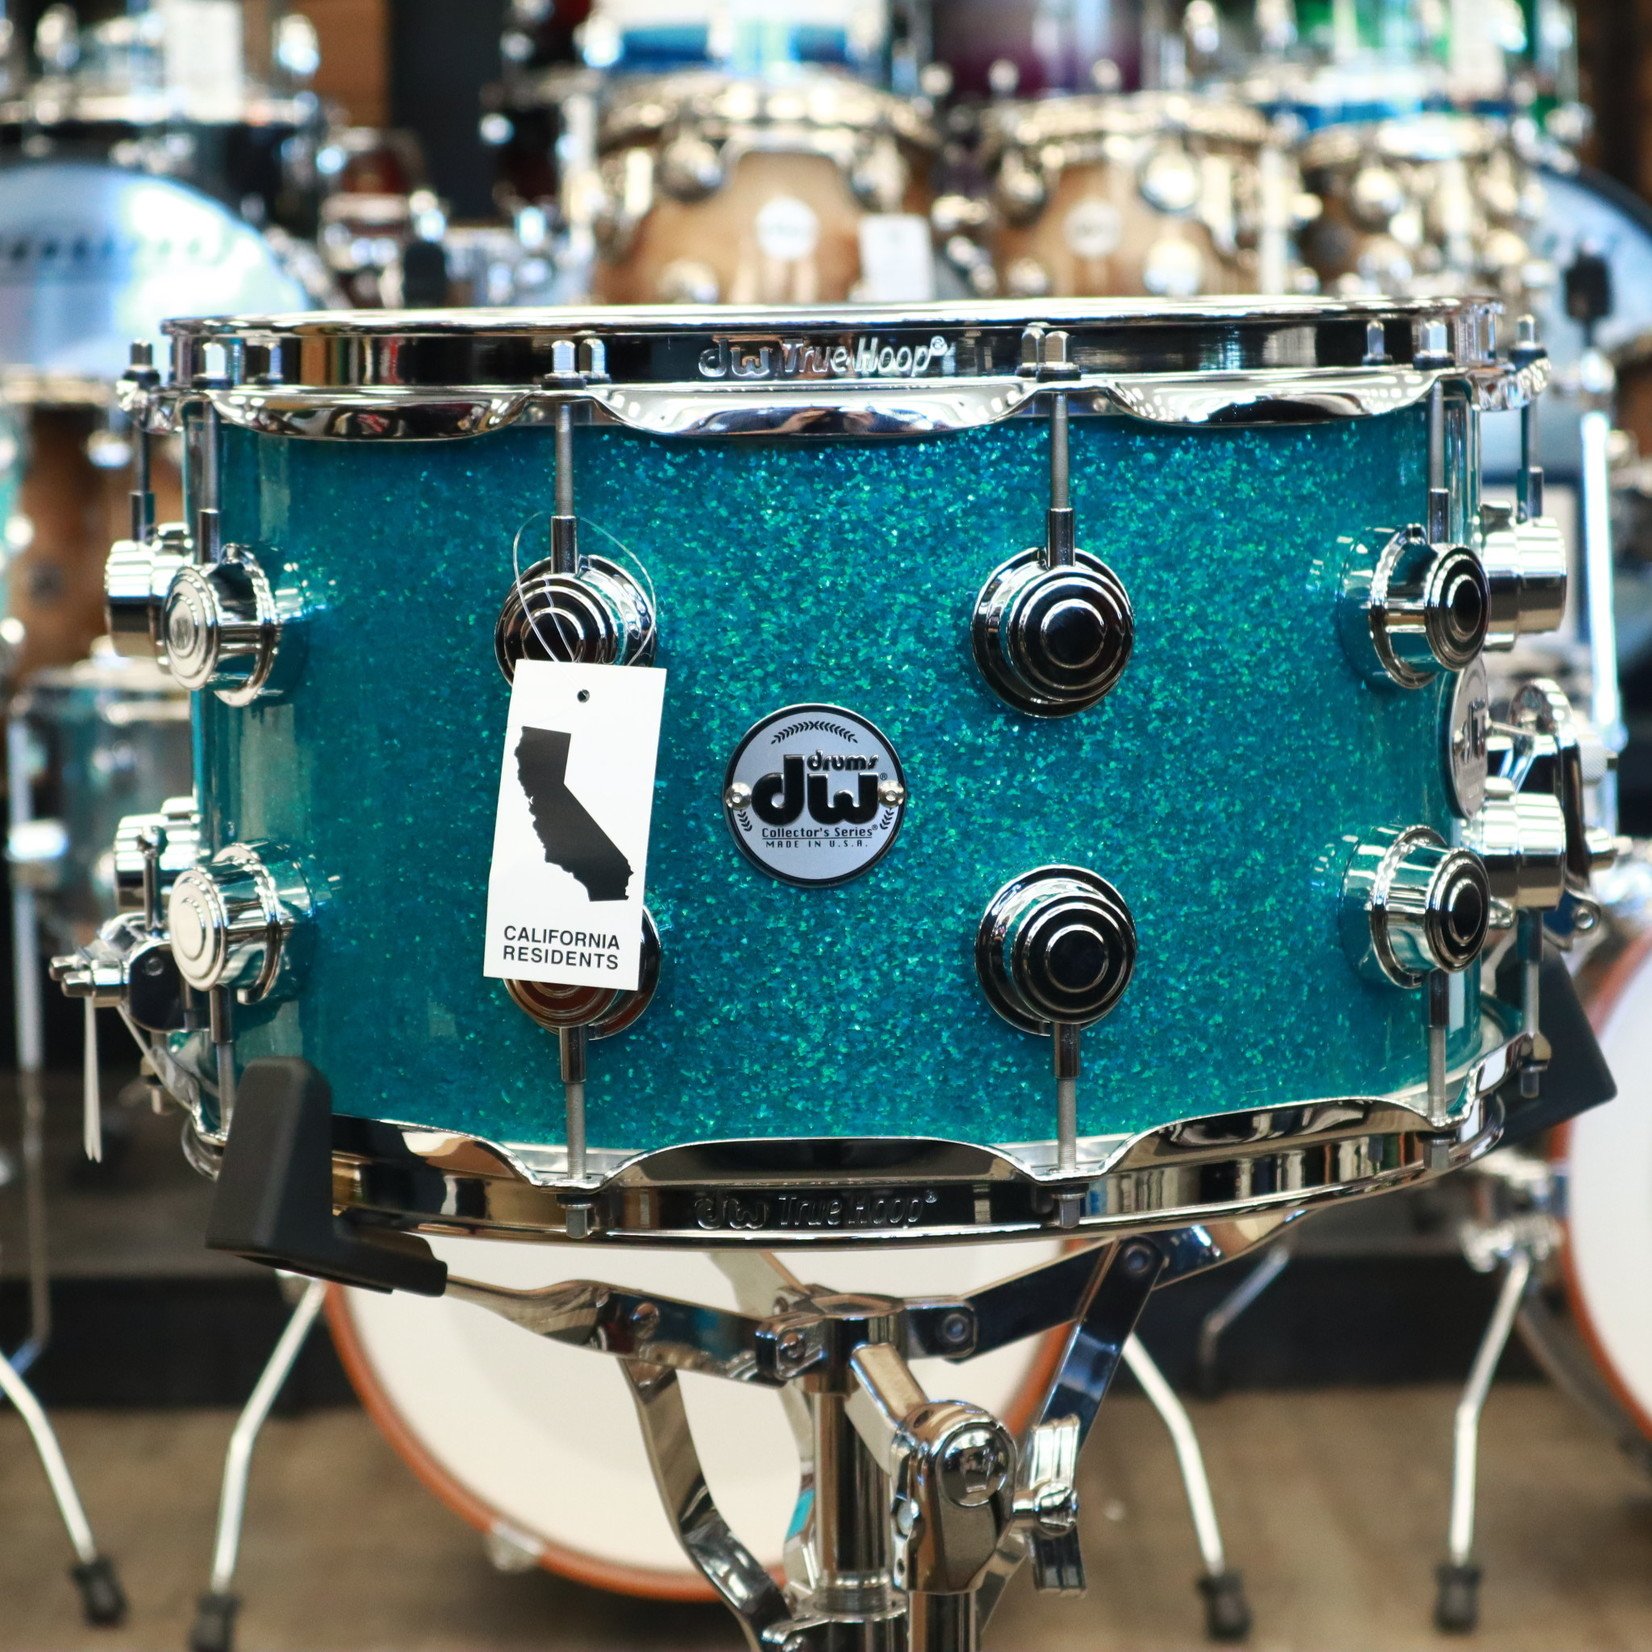 DW DW Collector's 8x14" Maple Snare Drum (Teal Glass Glitter w/ Chrome Hardware)